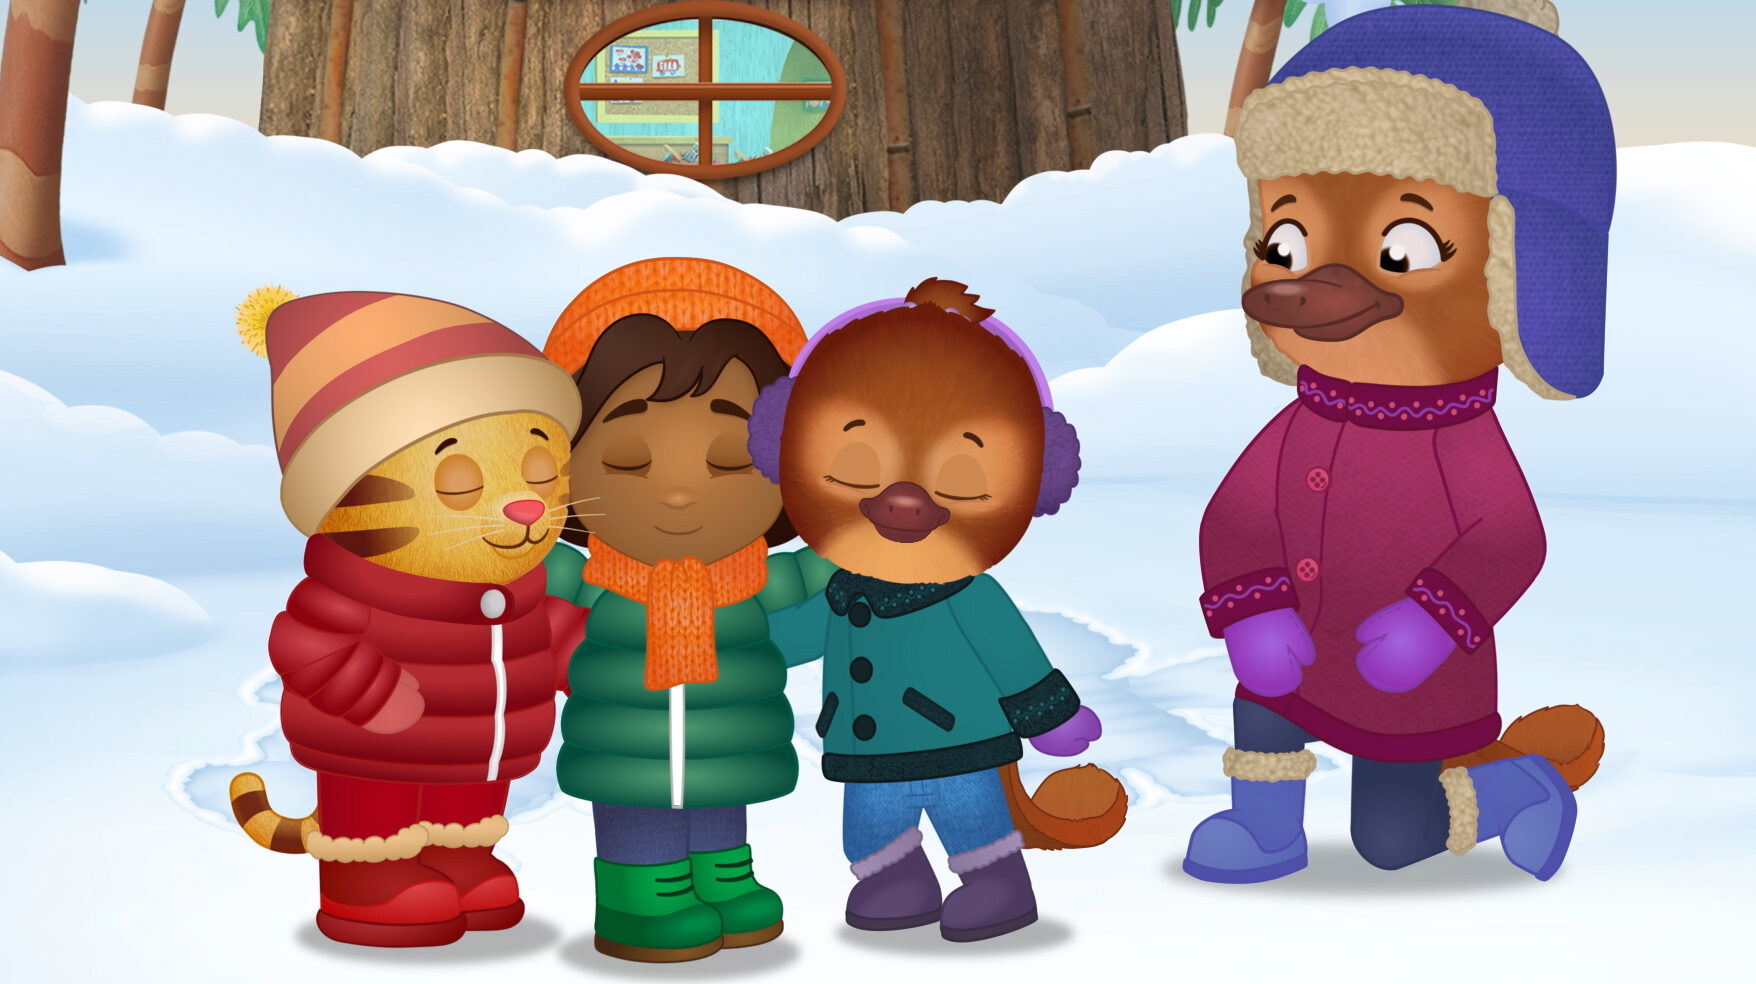 An illustration of animal characters in a group hug in the snow.